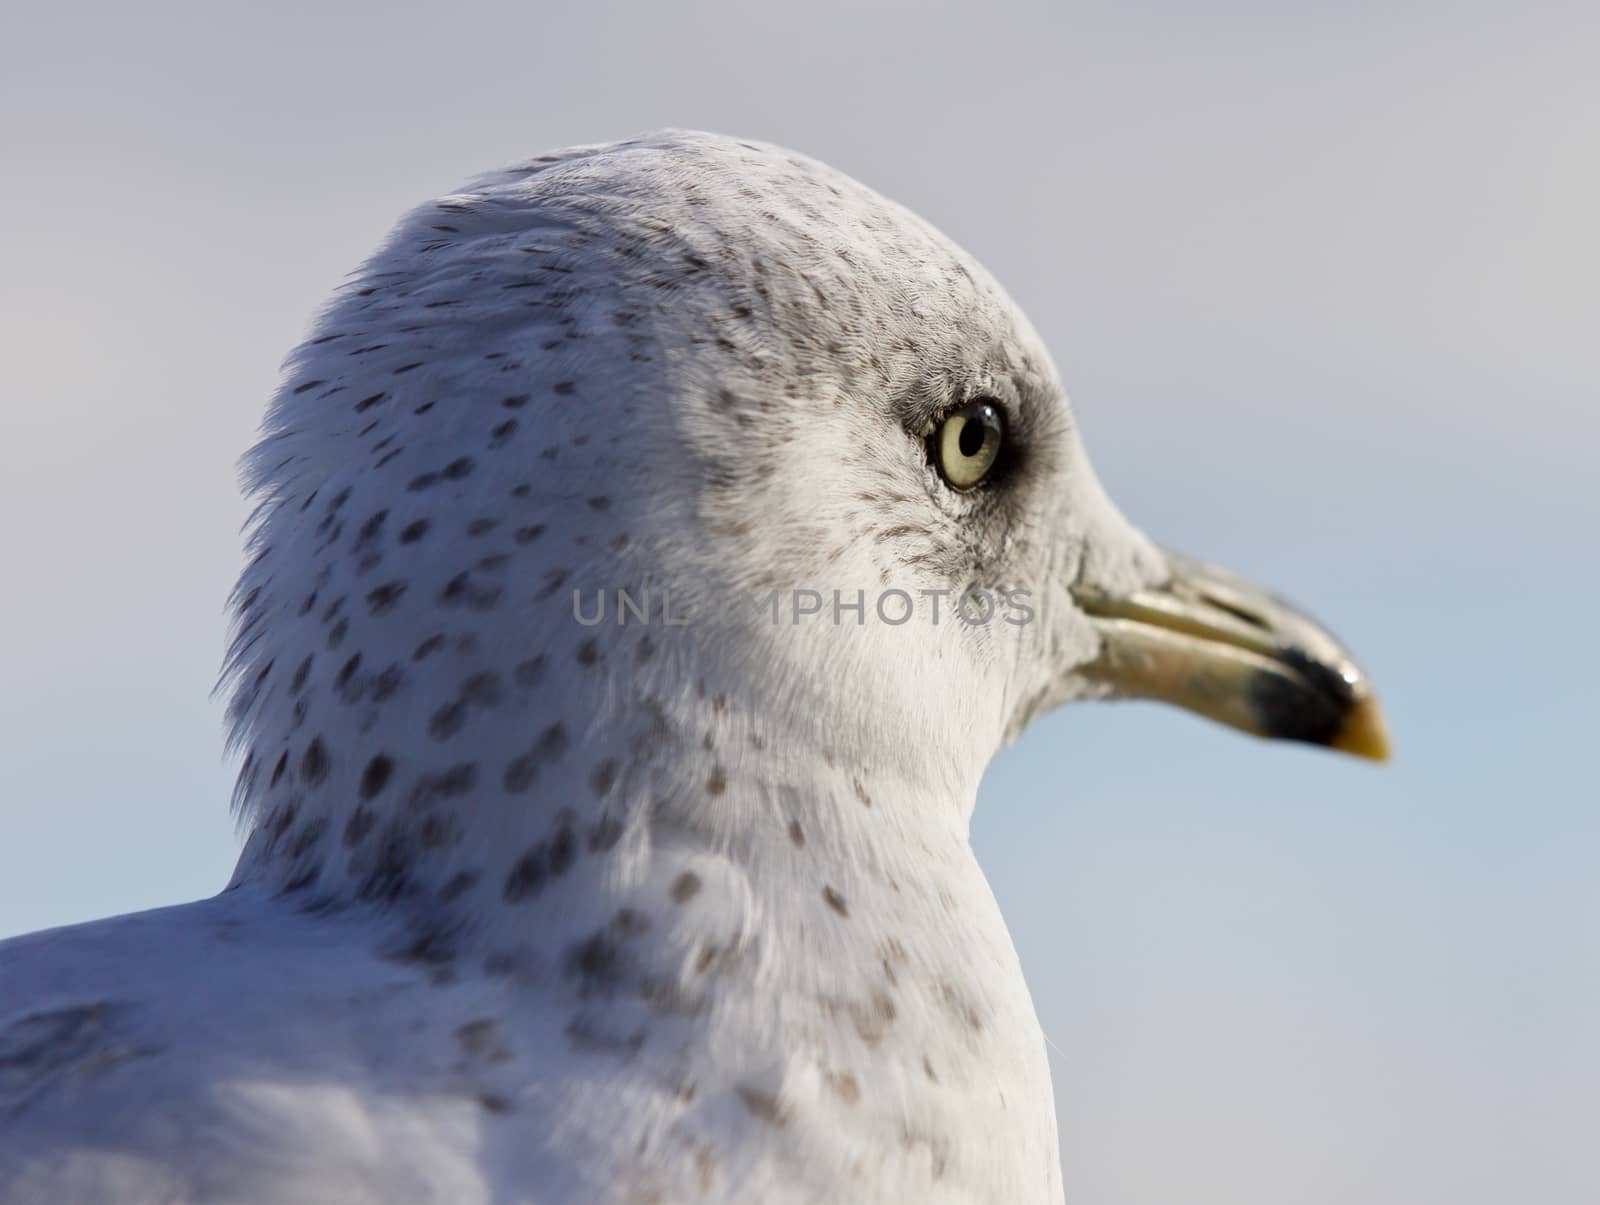 Amazing portrait of a cute beautiful gull looking aside by teo